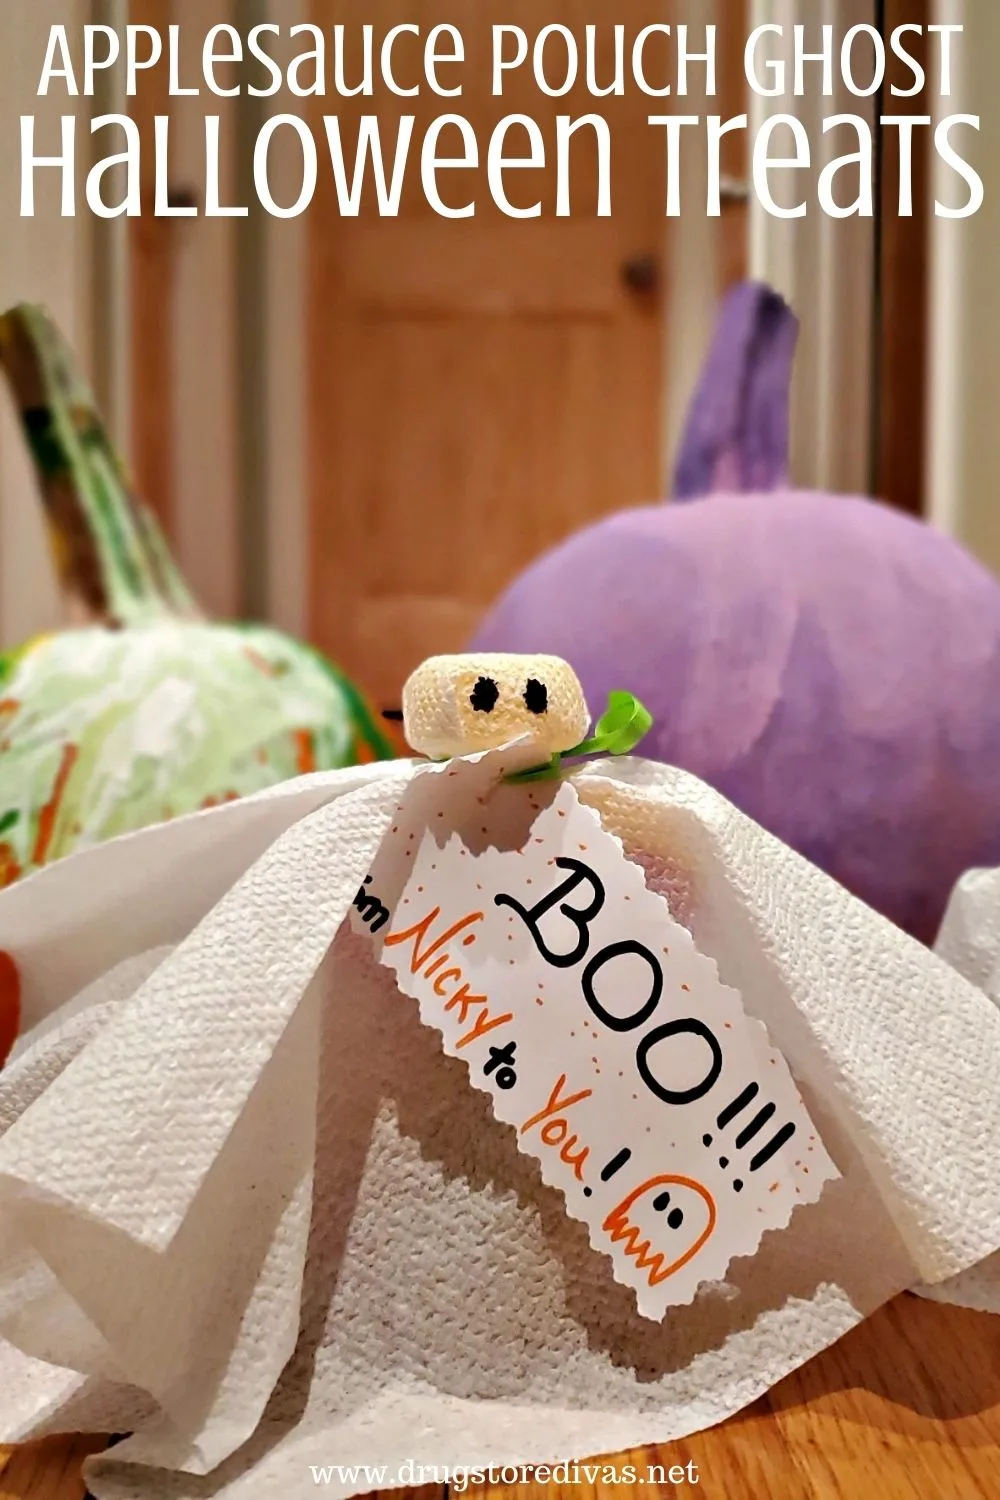 White napkin shaped like a ghost with a tag that reads "Boo!!! From Nicky to You!" in front of two painted pumpkins.